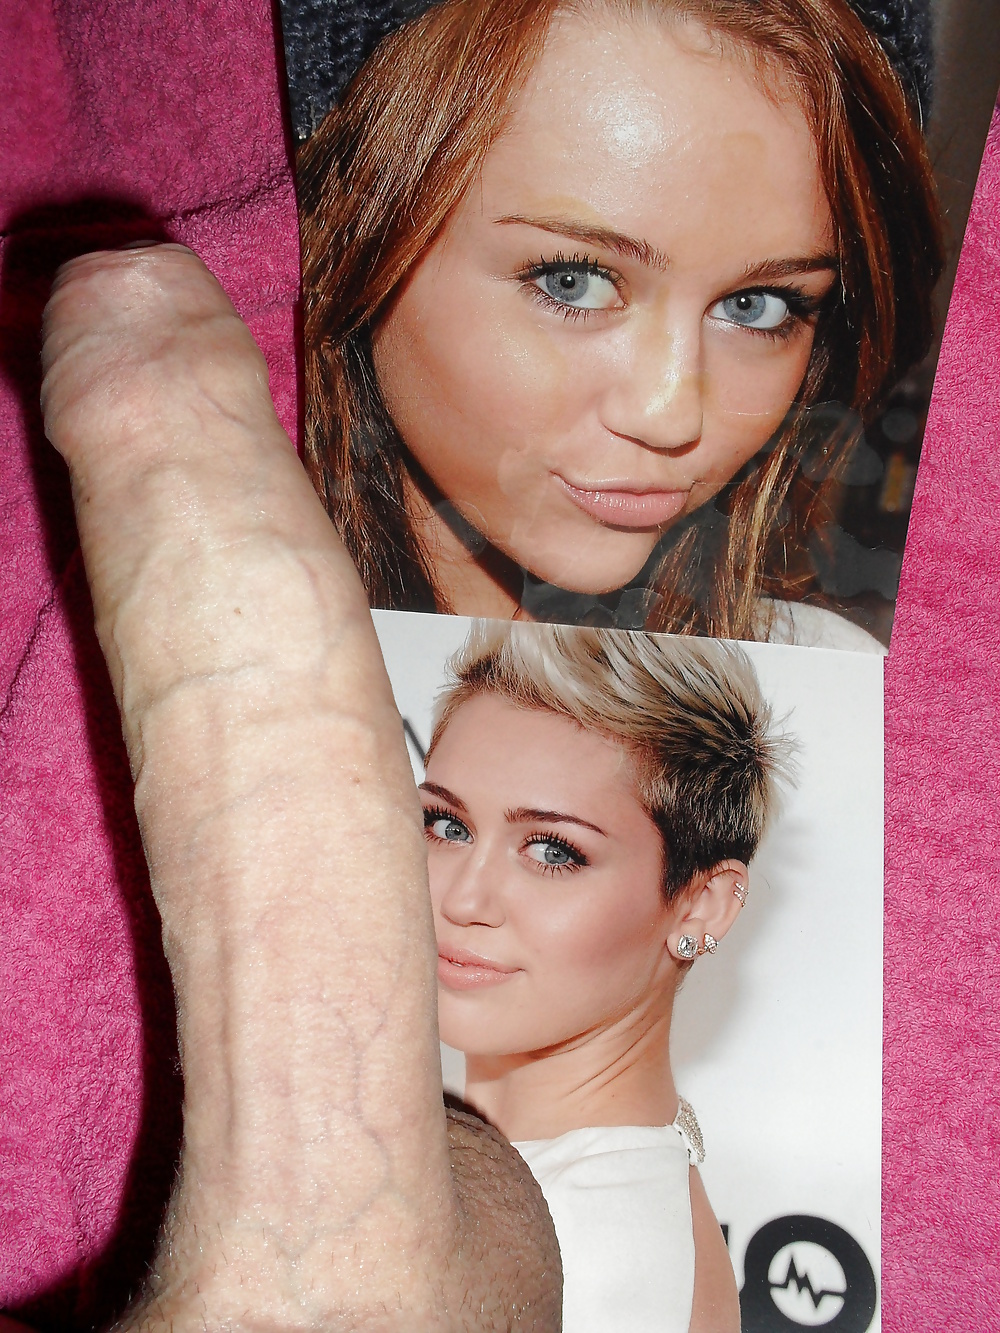 Miley cyrus - cumcovered
 #26940667